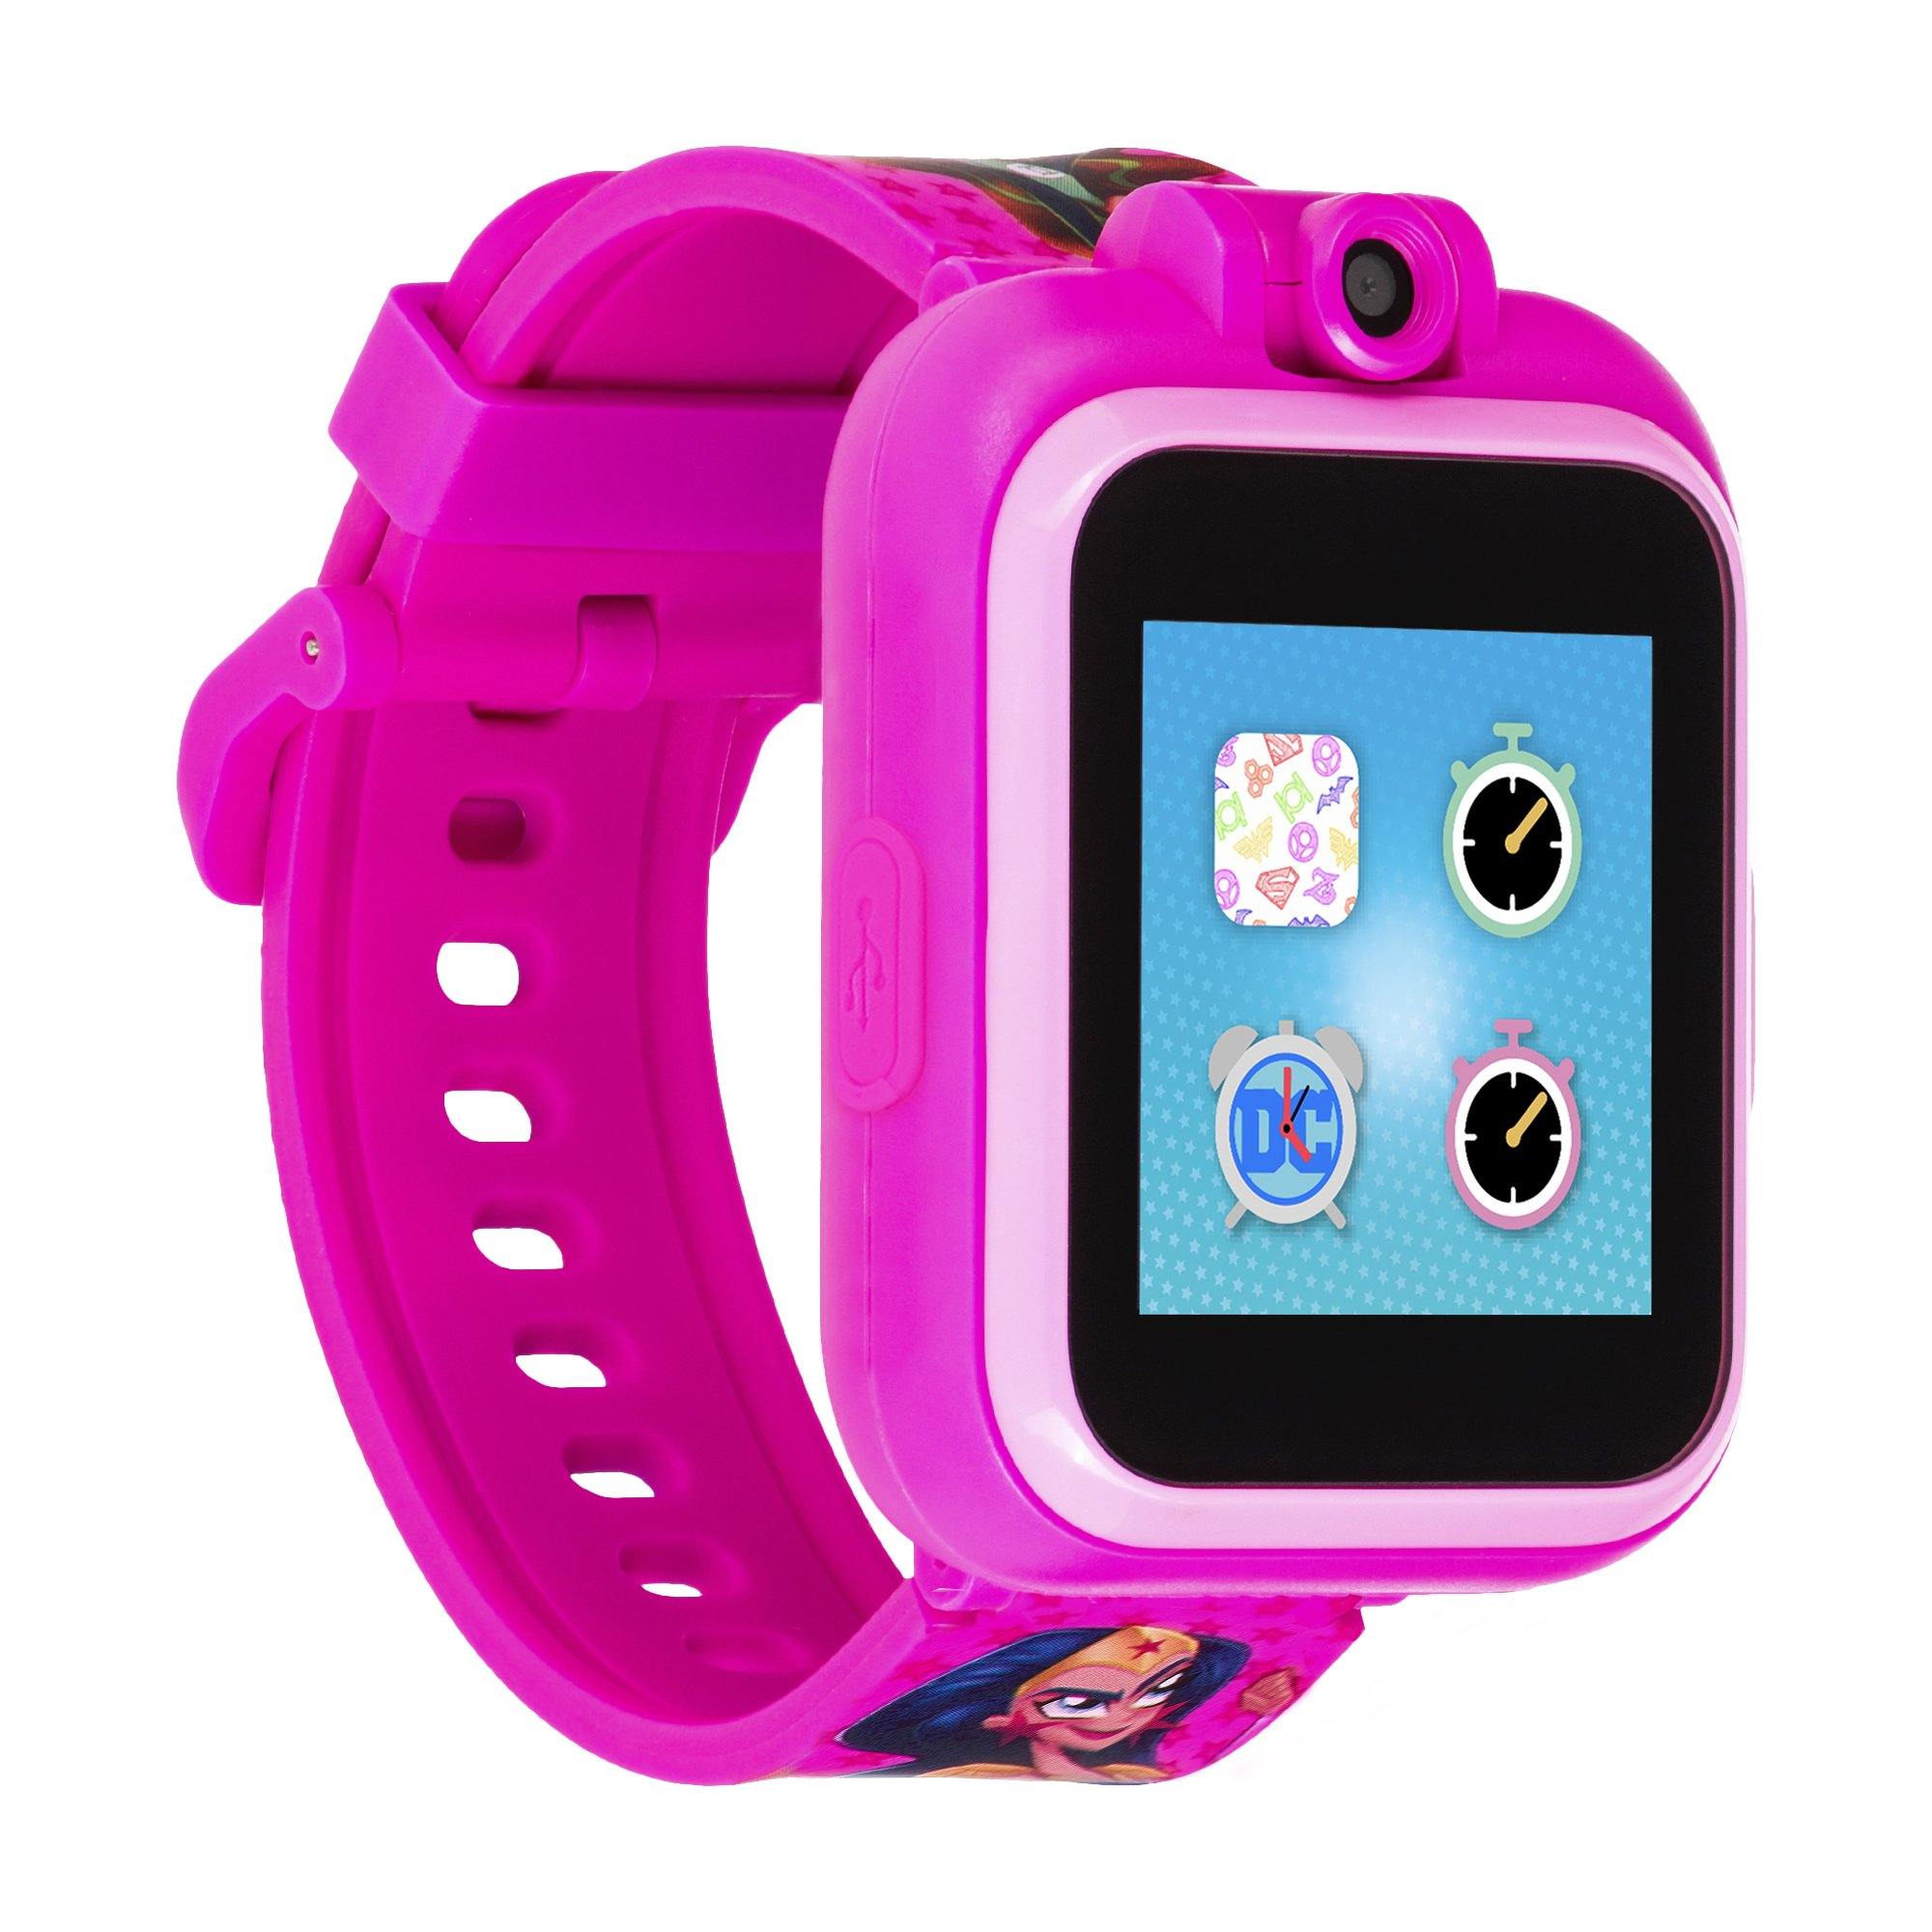 DC Superhero Girls Smartwatch for Kids by PlayZoom affordable smart watch